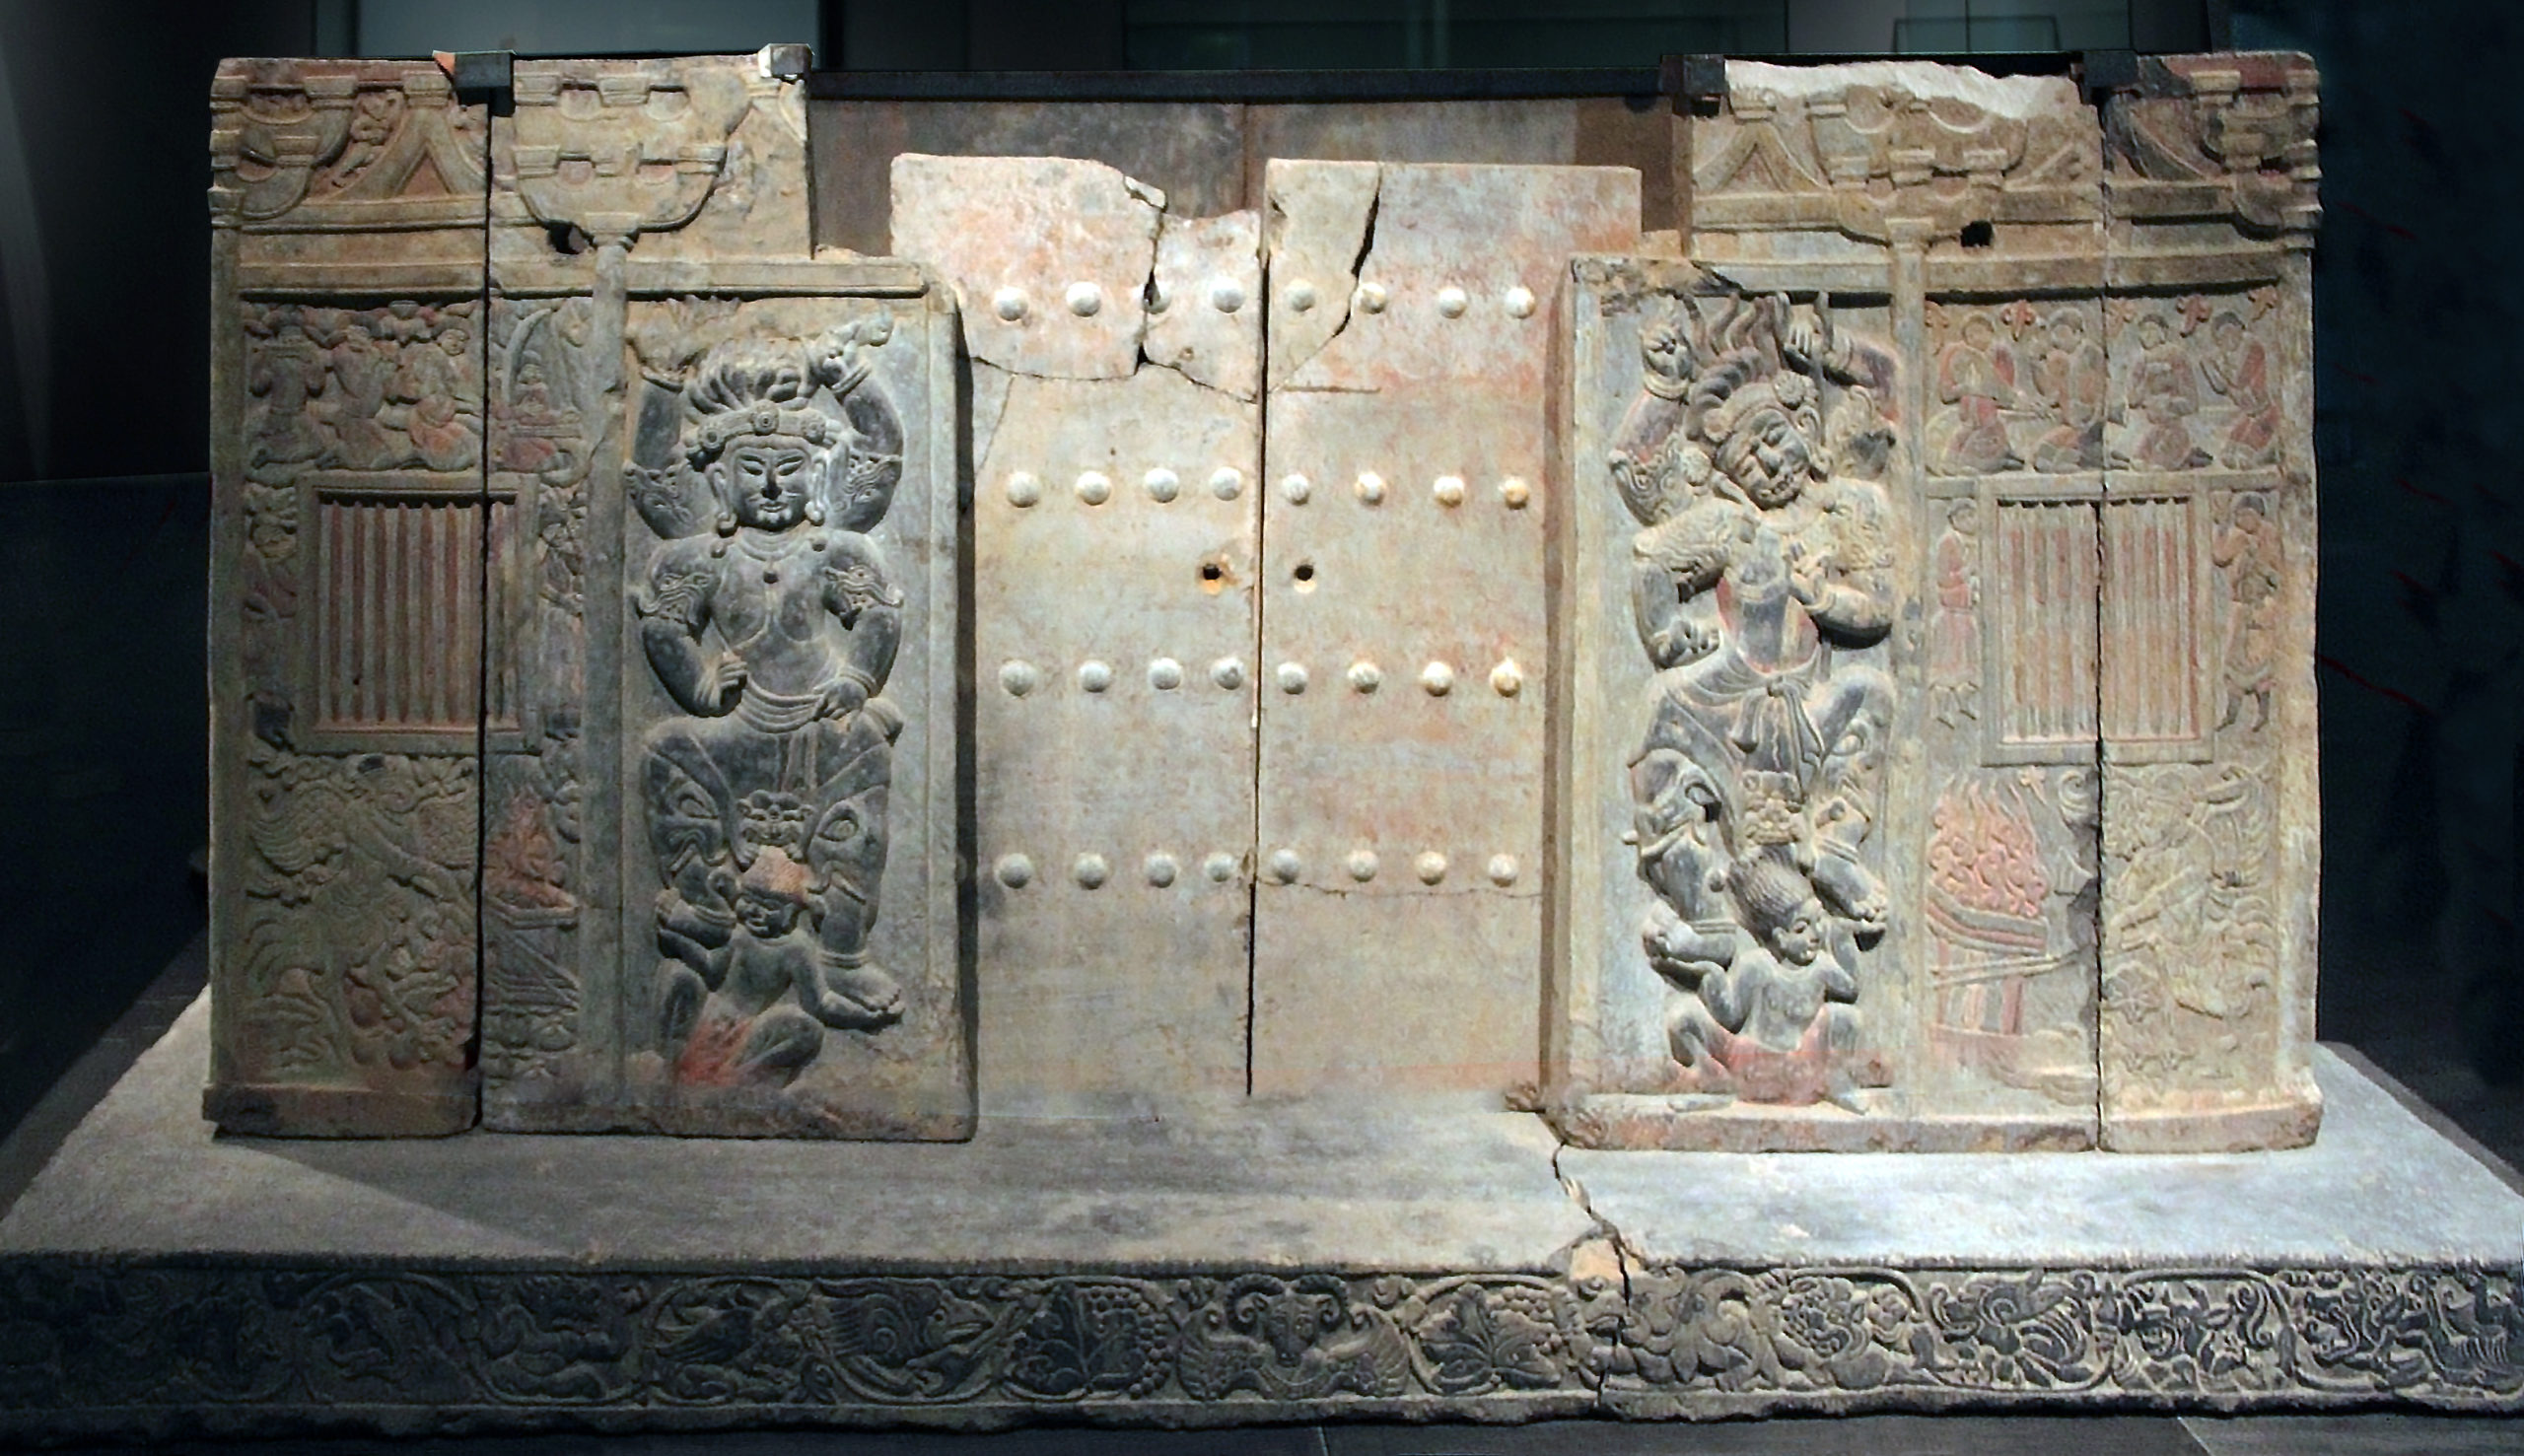 Wirkak or Shi Jun sarcophagus, 579–80 (Northern Zhou dynasry), stone carvings with traces of pigment and gilding, China, Shaanxi Province (Shaanxi History Museum, Xi’an, China)